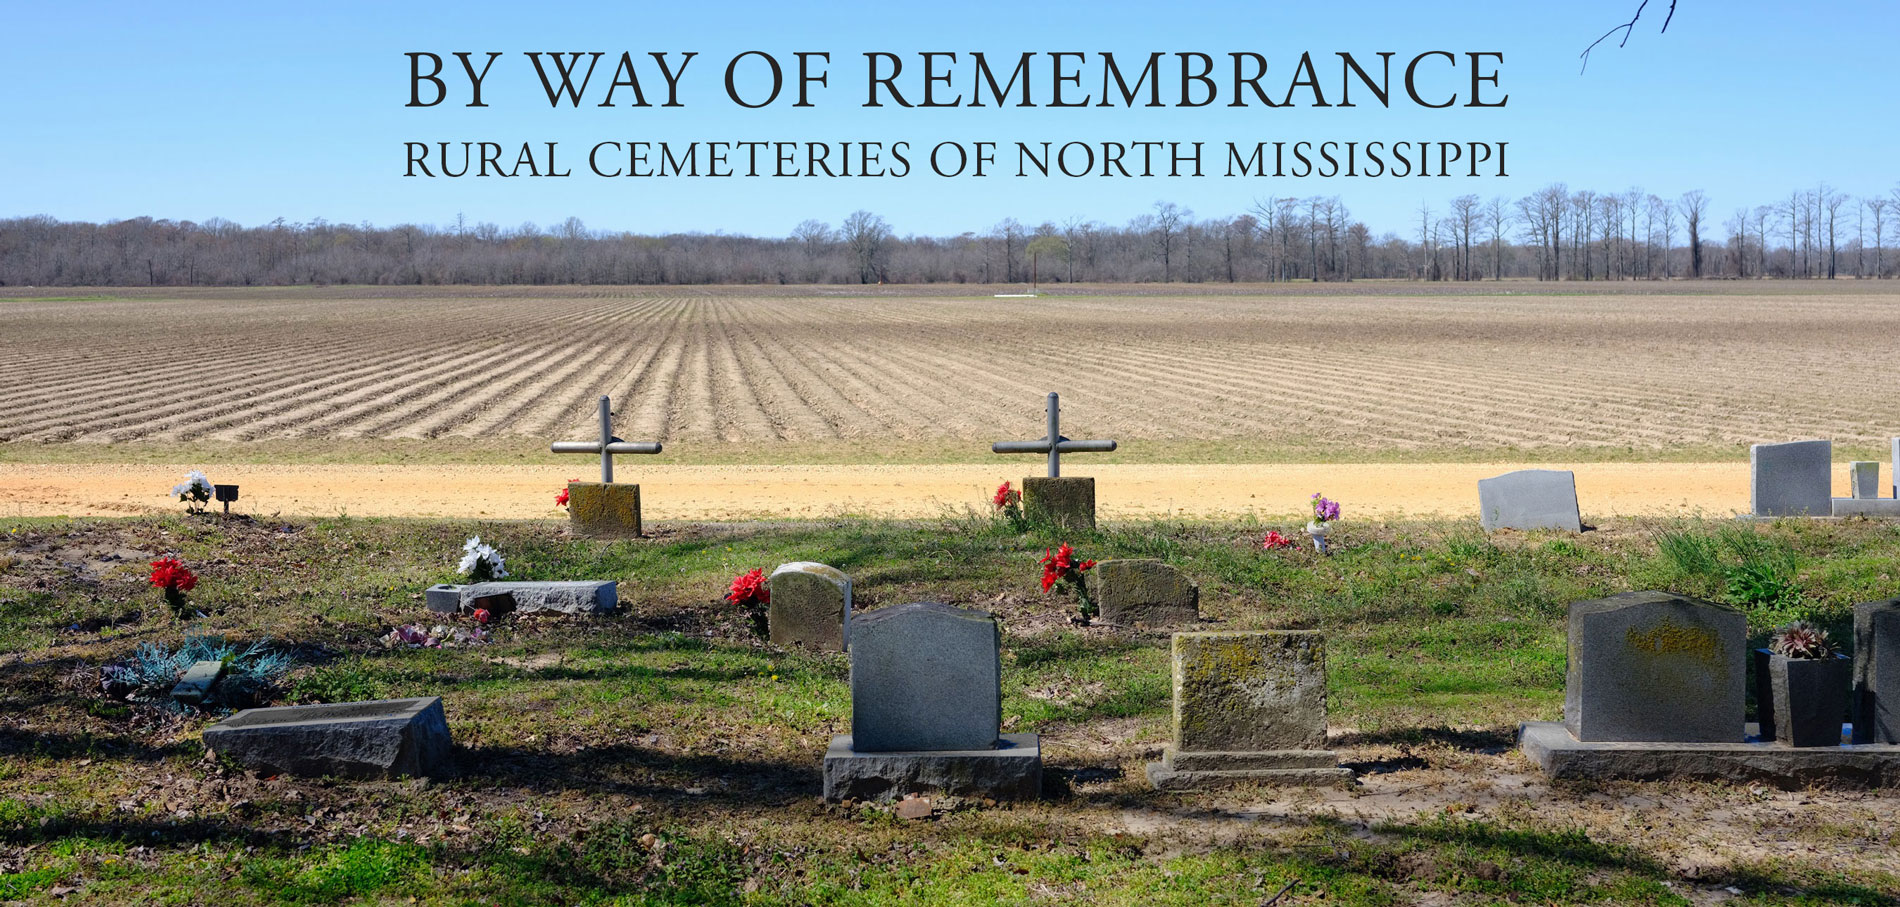 By Way of Remembrance: Rural Cemeteries of North Mississippi